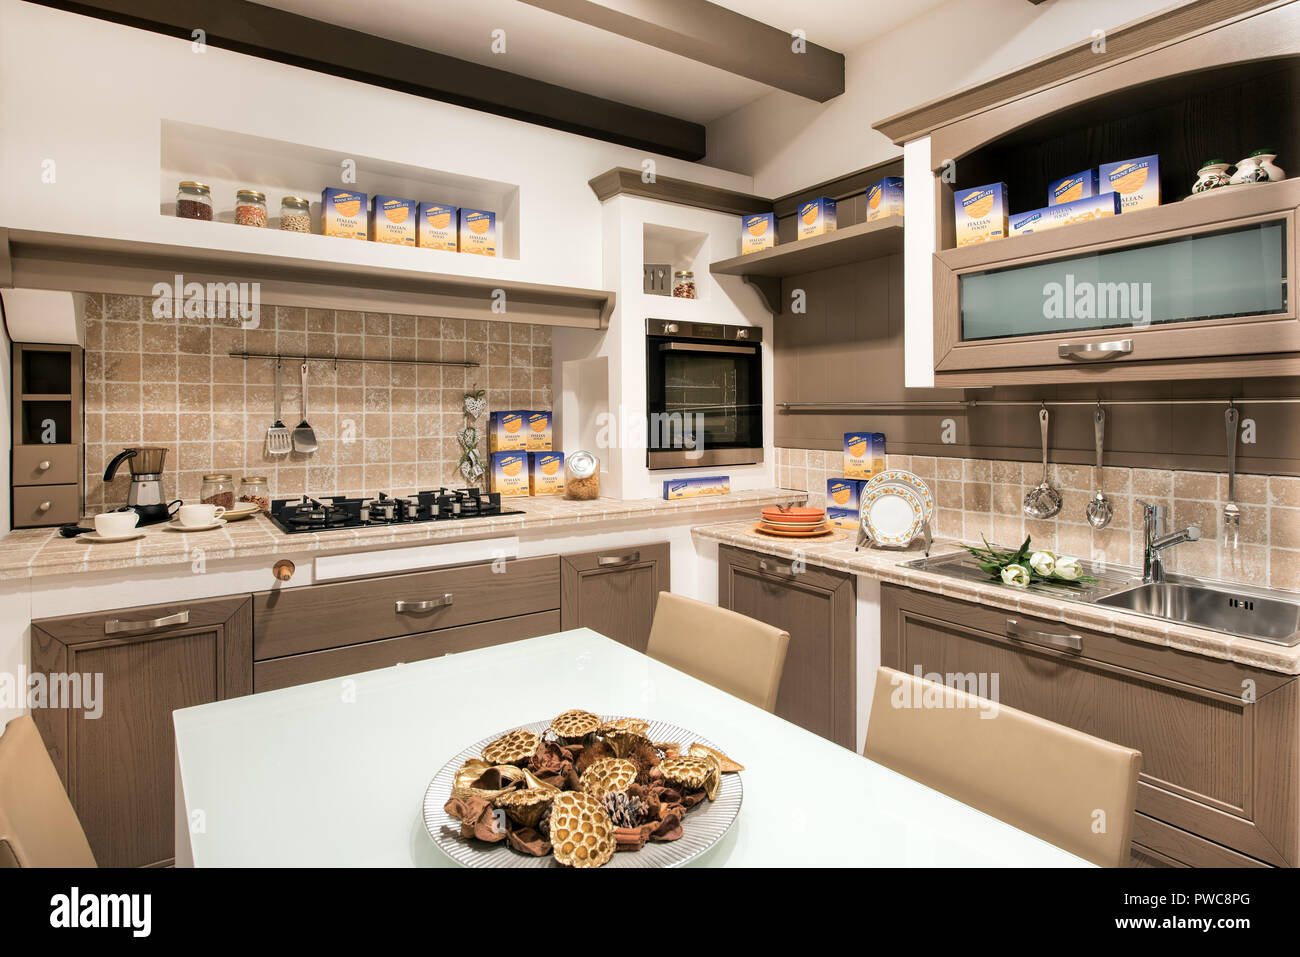 Rustic or kitchen interior with cooking supplies, built in cabinets with tiled splash back, fitted appliances and a center table with homemade cookies Stock Photo